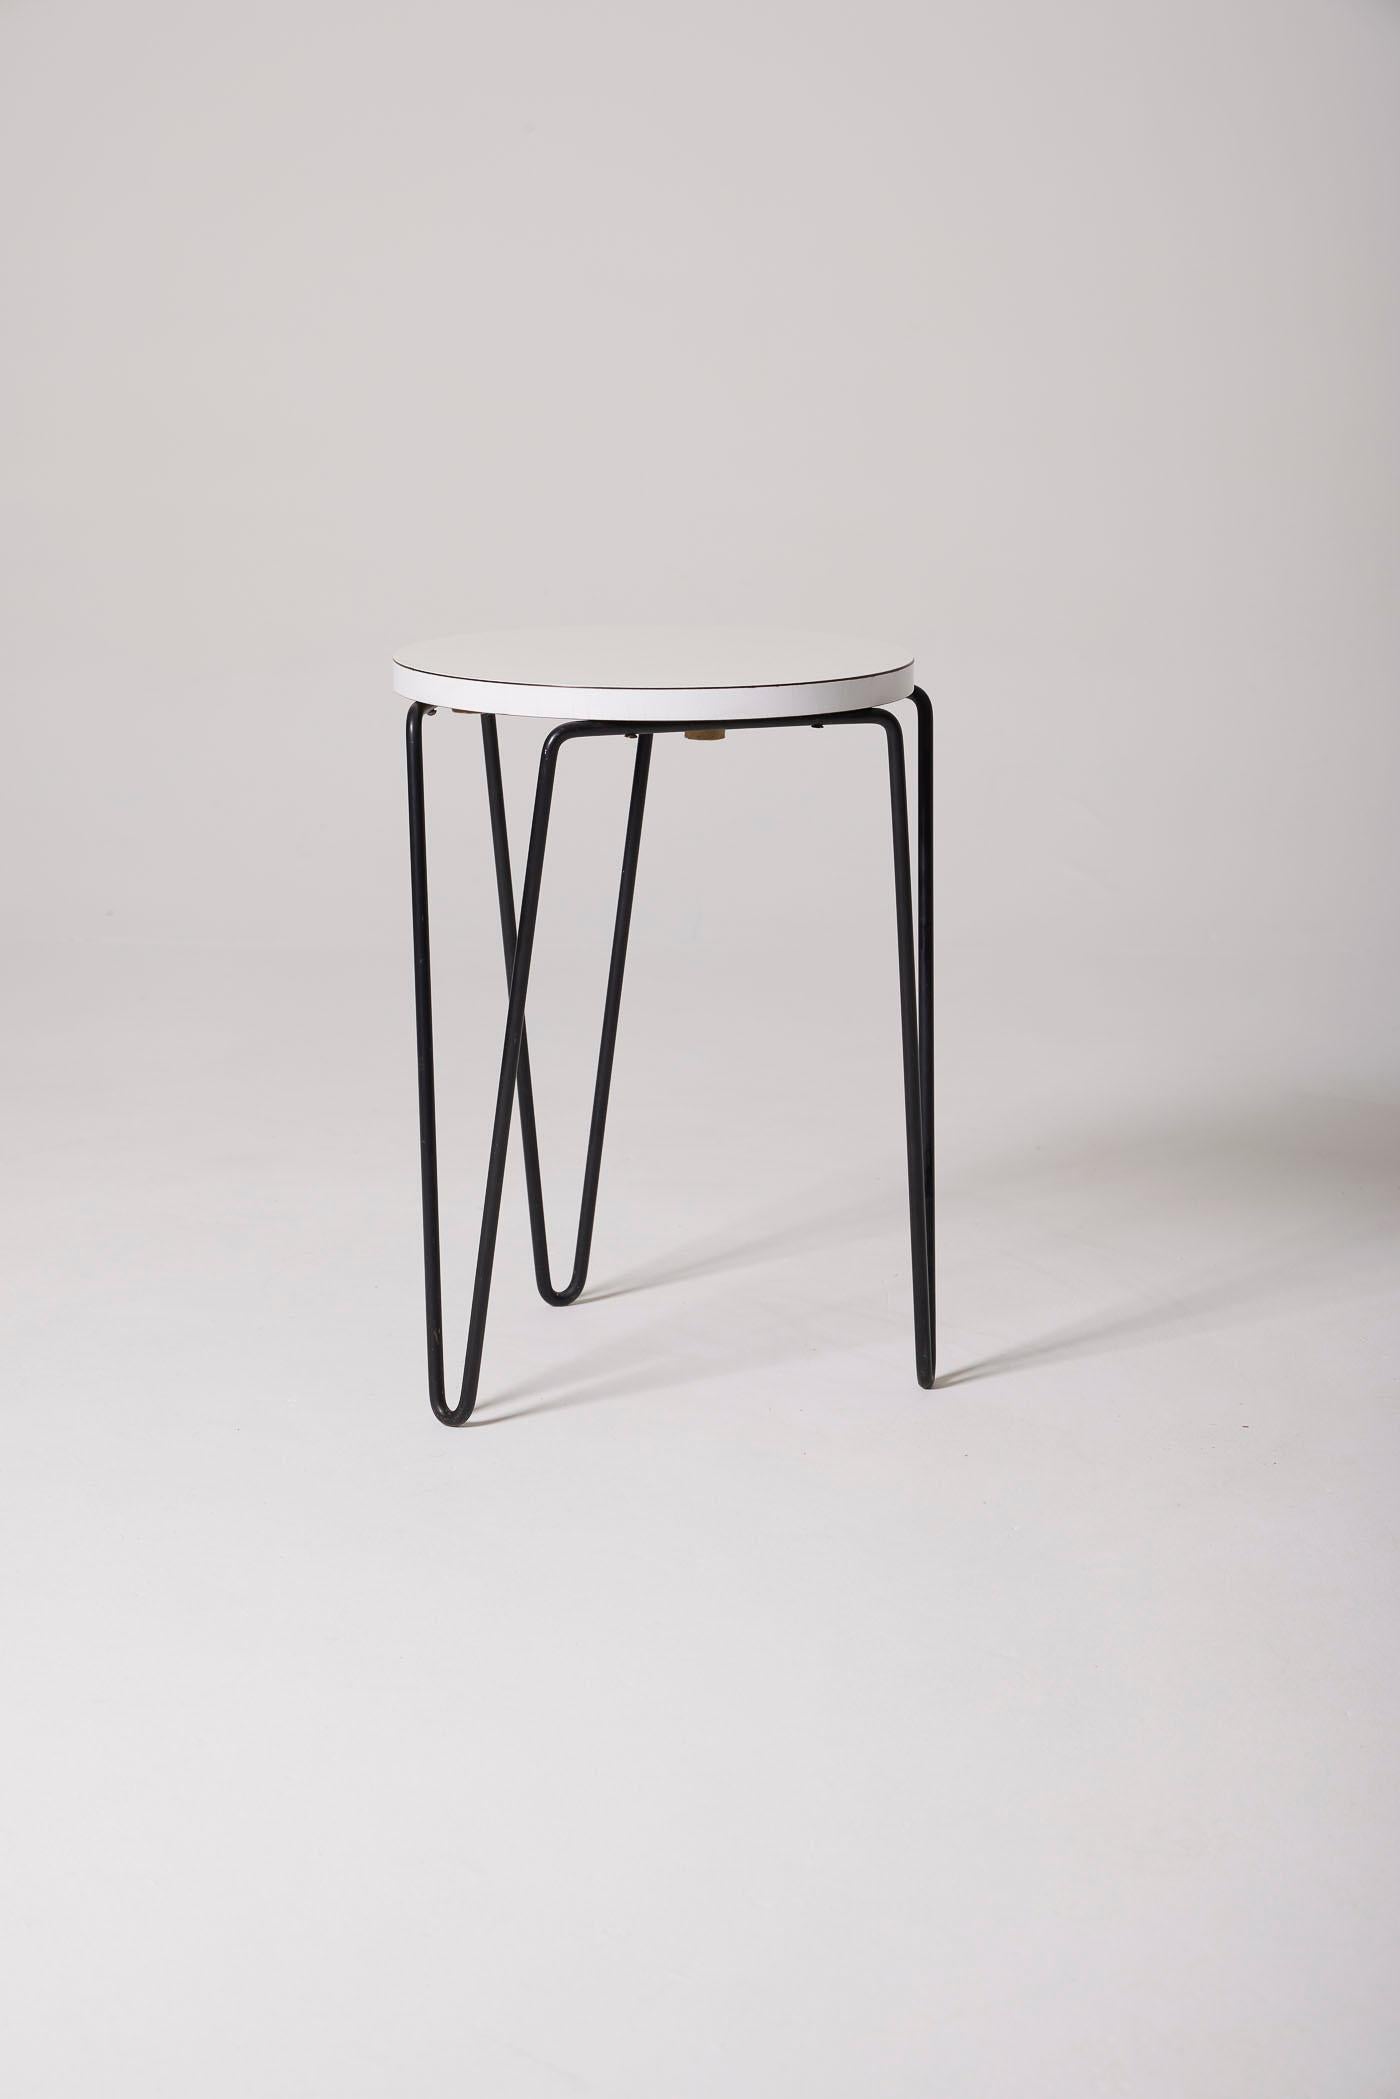 Stool model 75 designed by Florence Knoll for Knoll International, 1950s. White Formica seat resting on a black lacquered tubular base. In perfect condition.
DV504